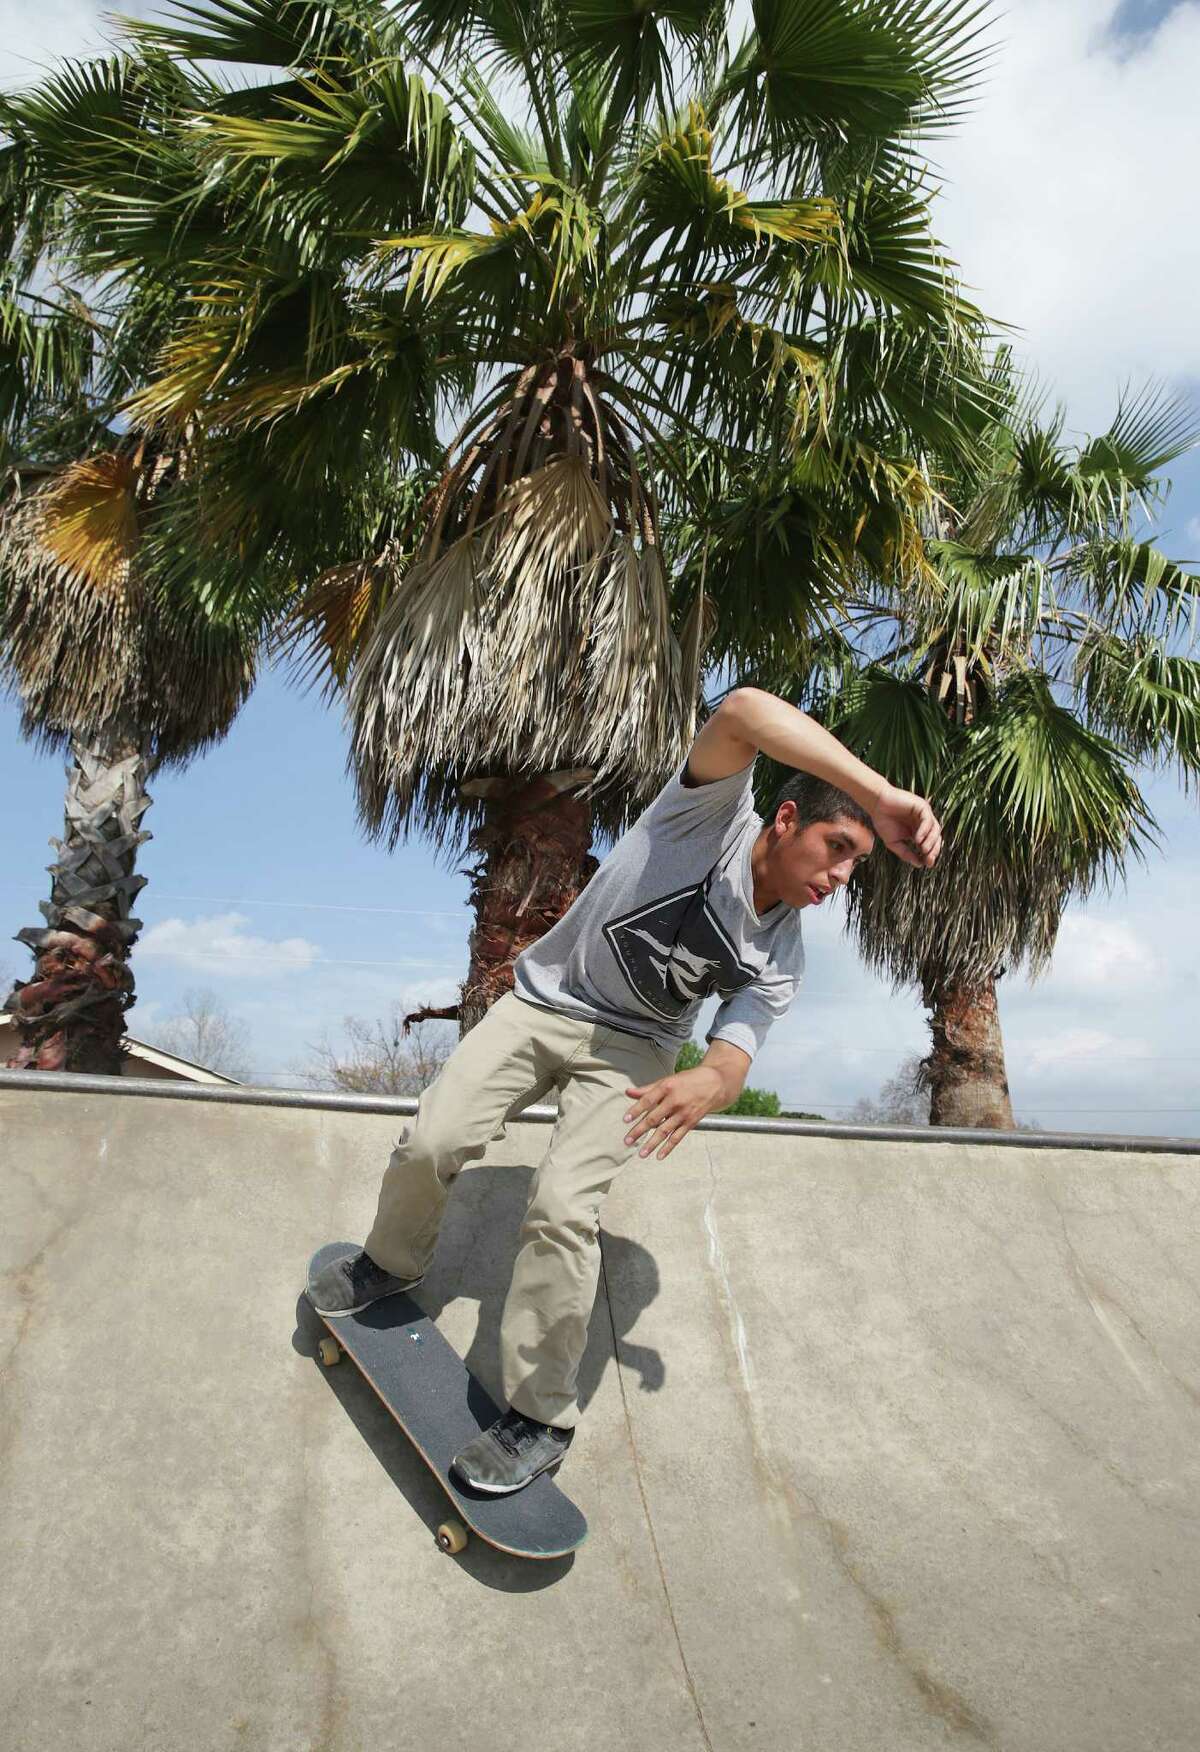 Anthony Rosales works out in the warm weather at the Jaws Skate Park in New Braunfels on March 8.